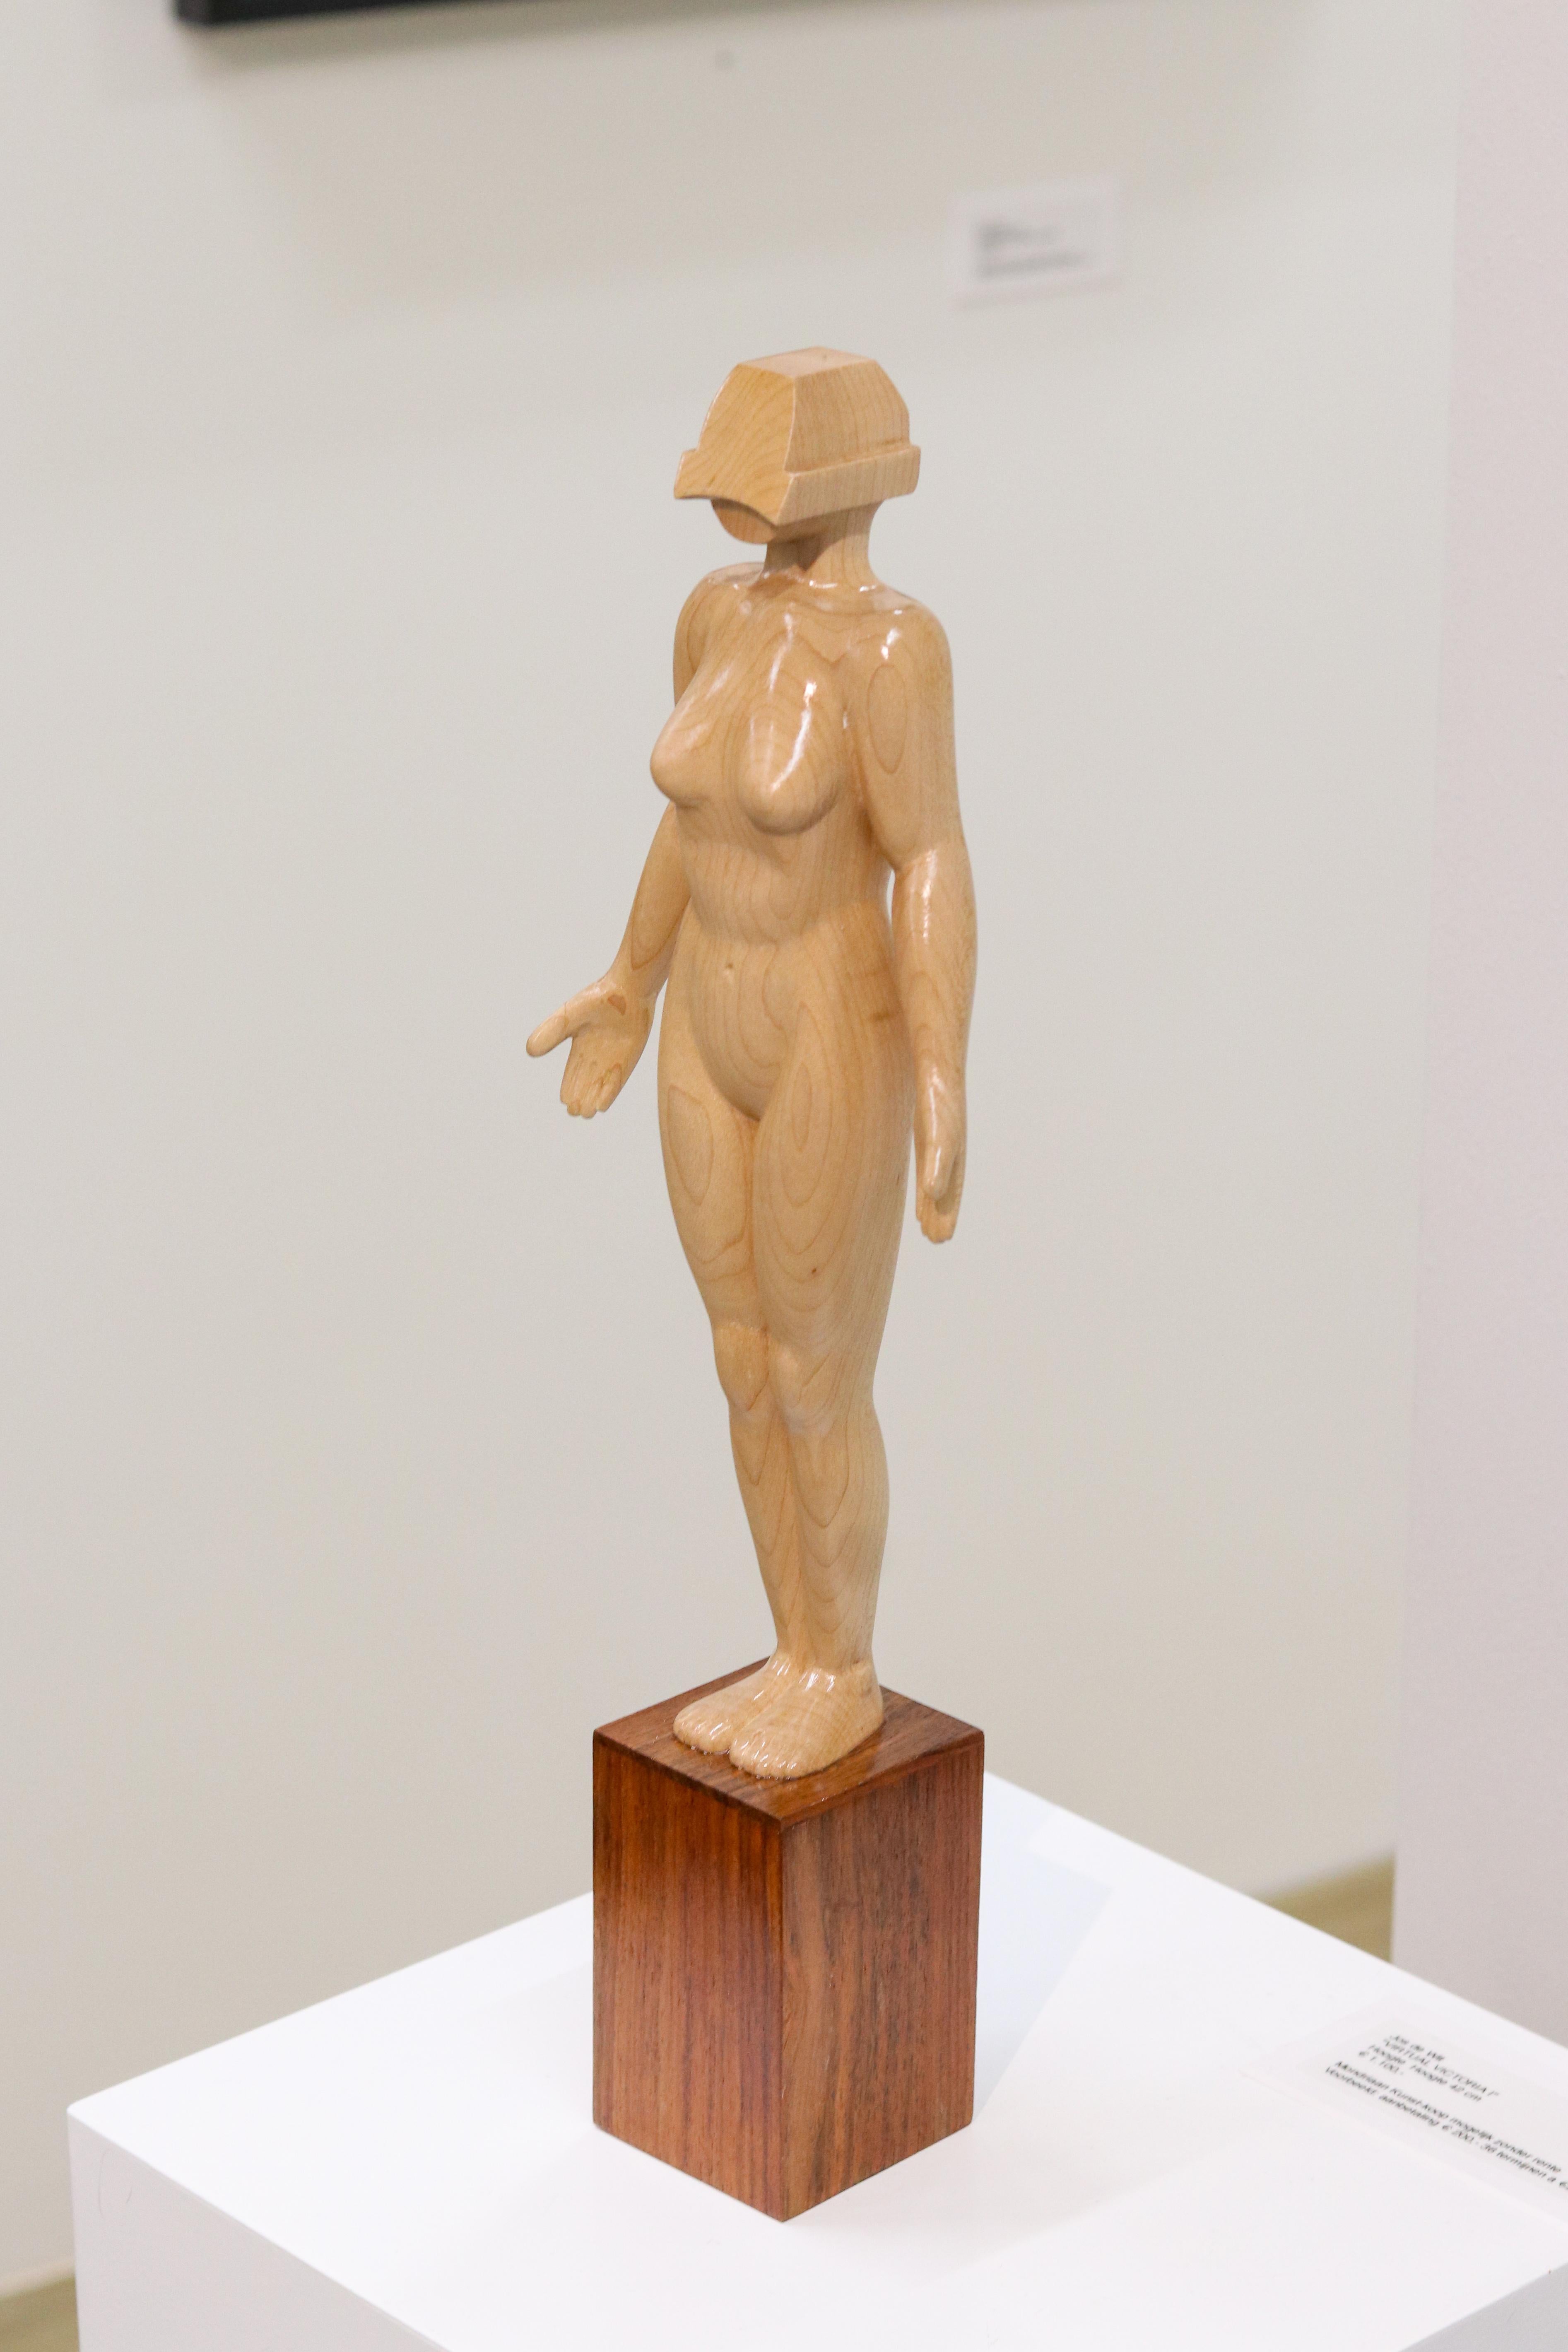 Virtual Victoria - 21st Century Contemporary Wooden Sculpture of a Nude Woman